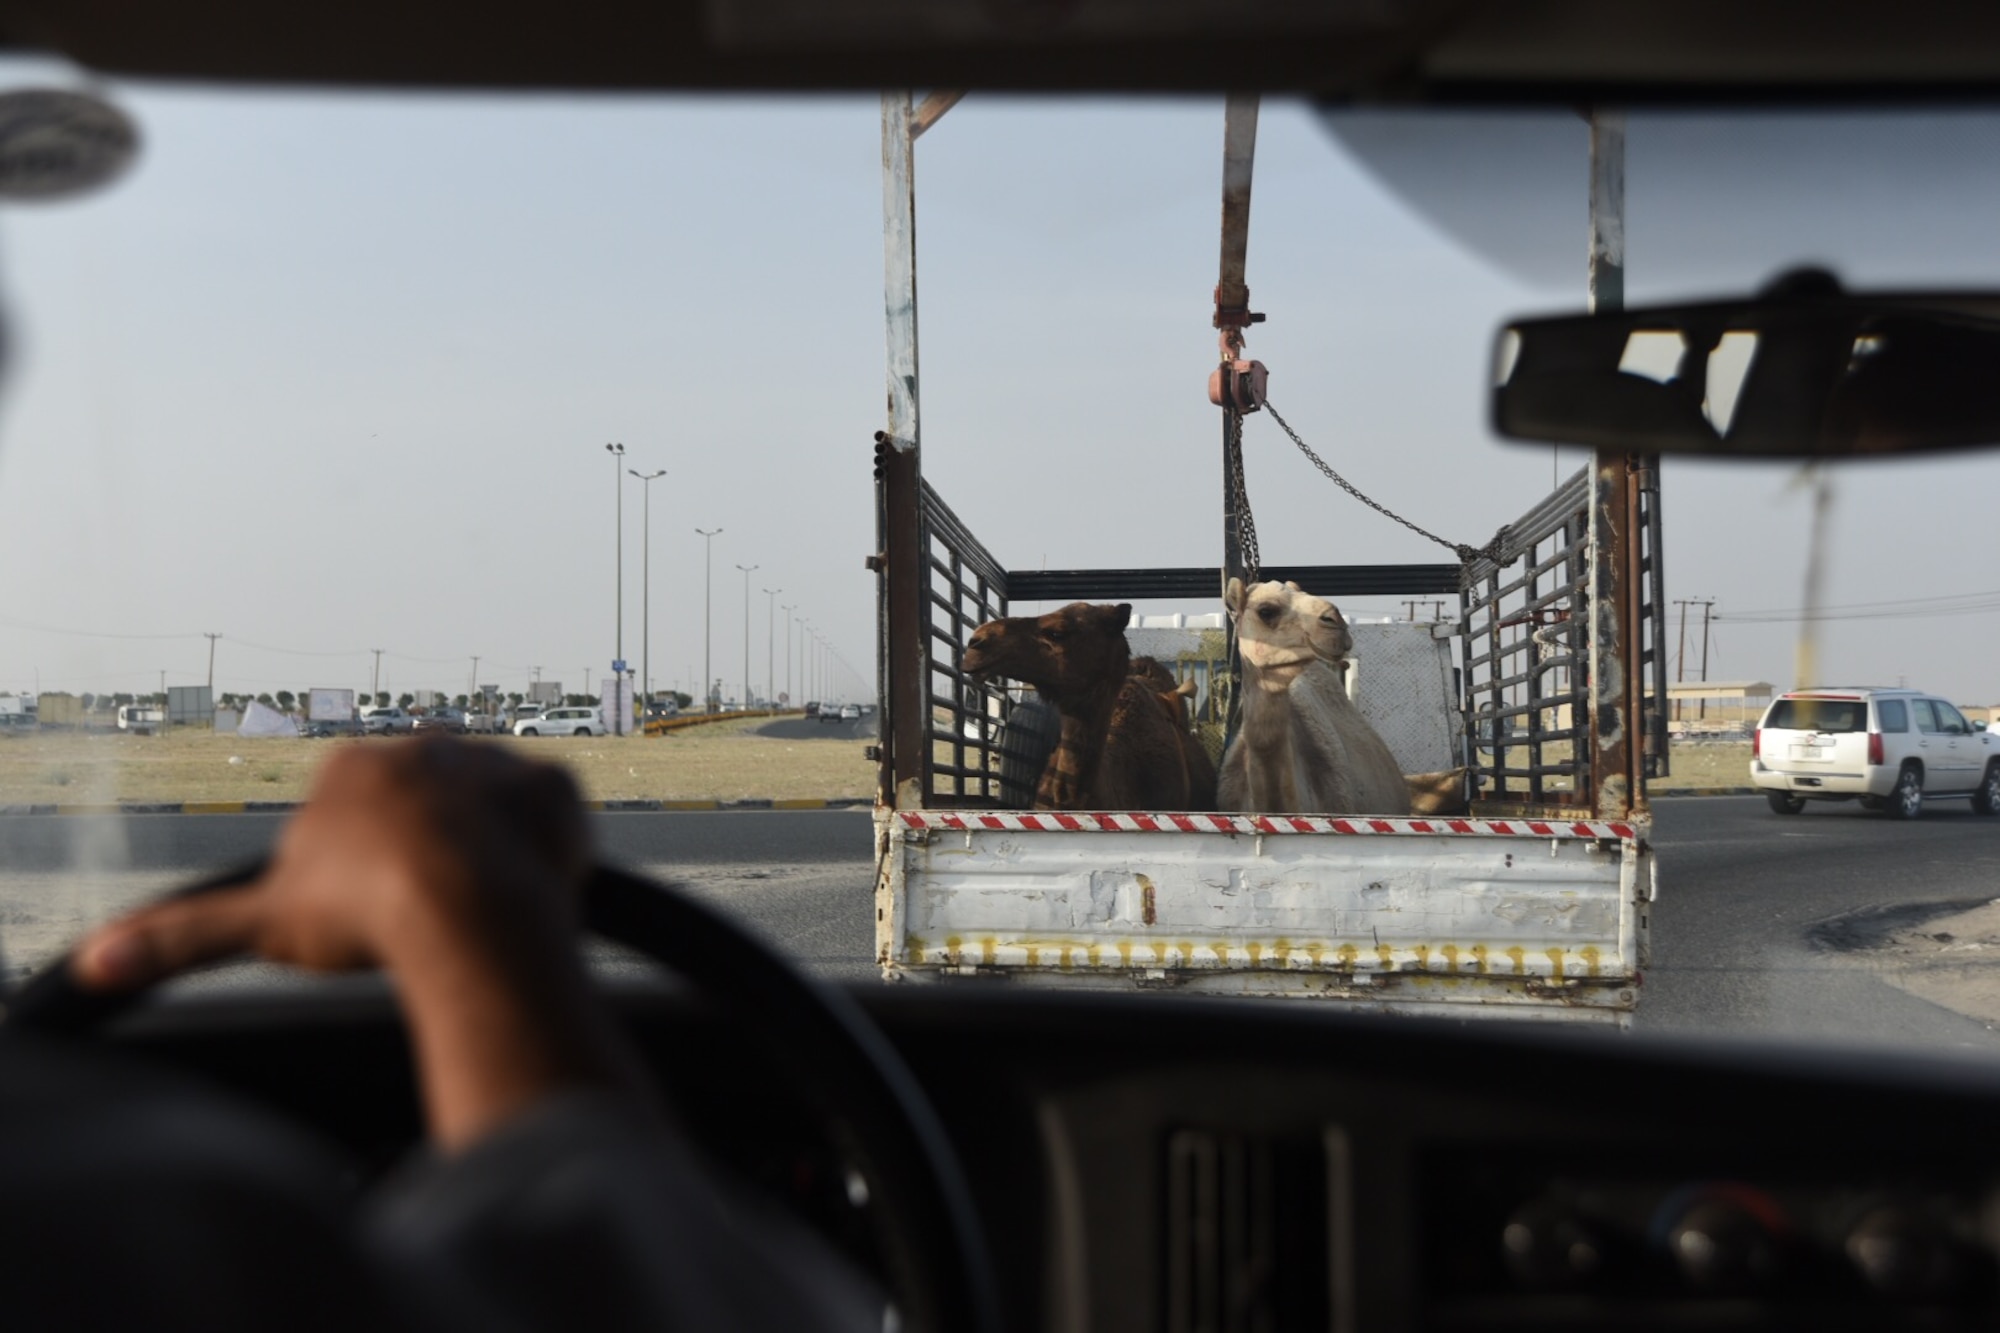 Two camels rest in the back of a truck on a highway in Kuwait, April 9, 2016. Camels are some of the many unique sights Airmen can witness while deployed. (U.S. Air Force photo by Airman 1st Class James L. Miller)